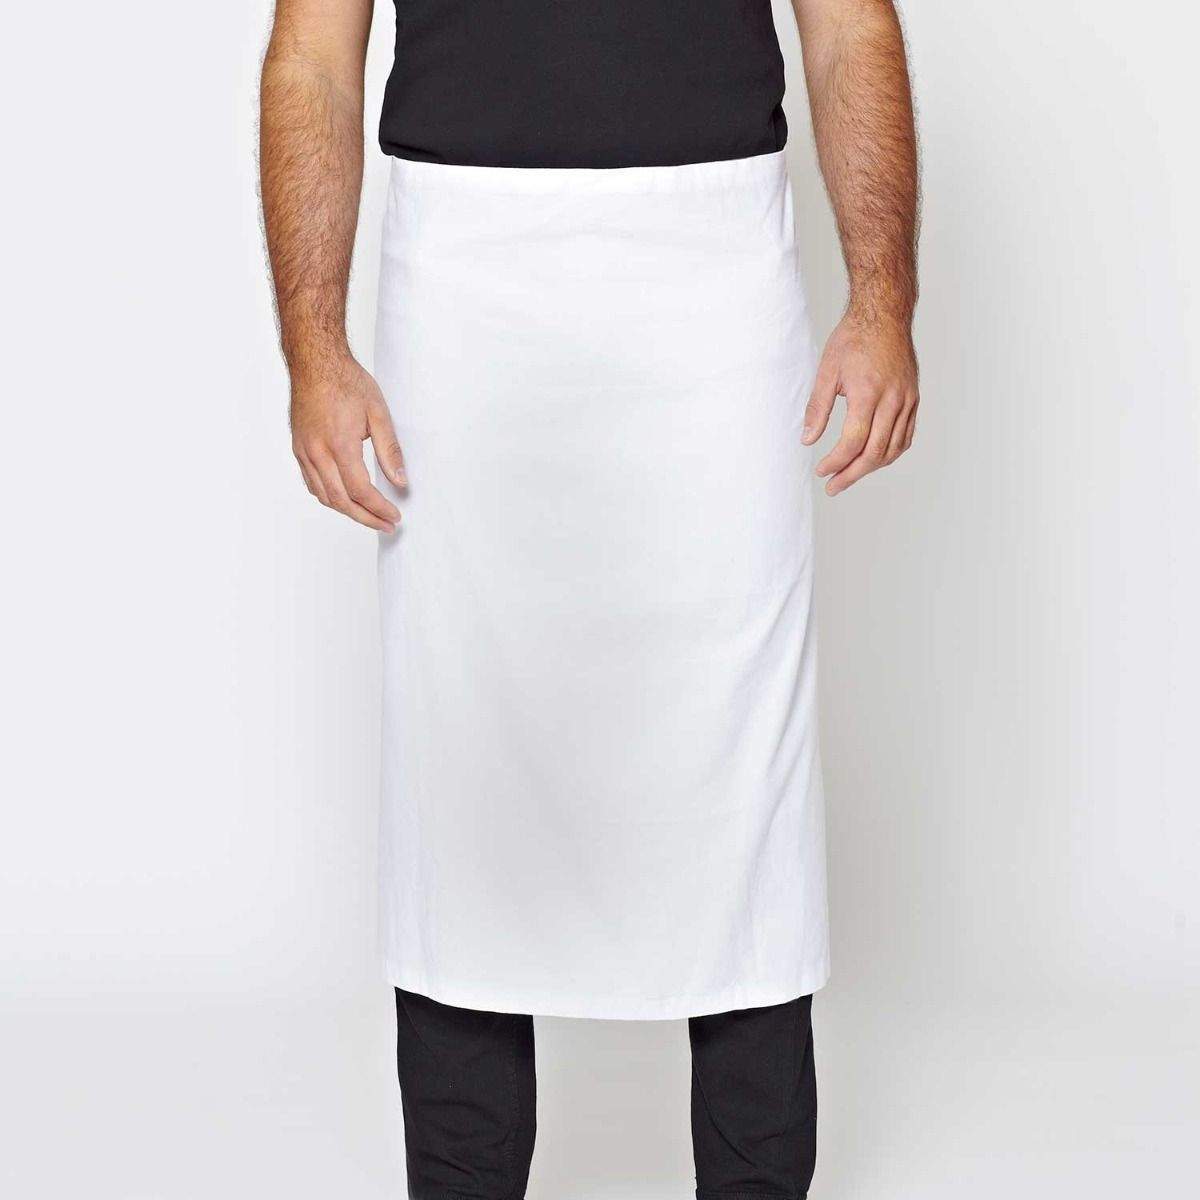 High Quality Kitchen Aprons 100% Cotton Pack of 5 Bed and Bath Linen